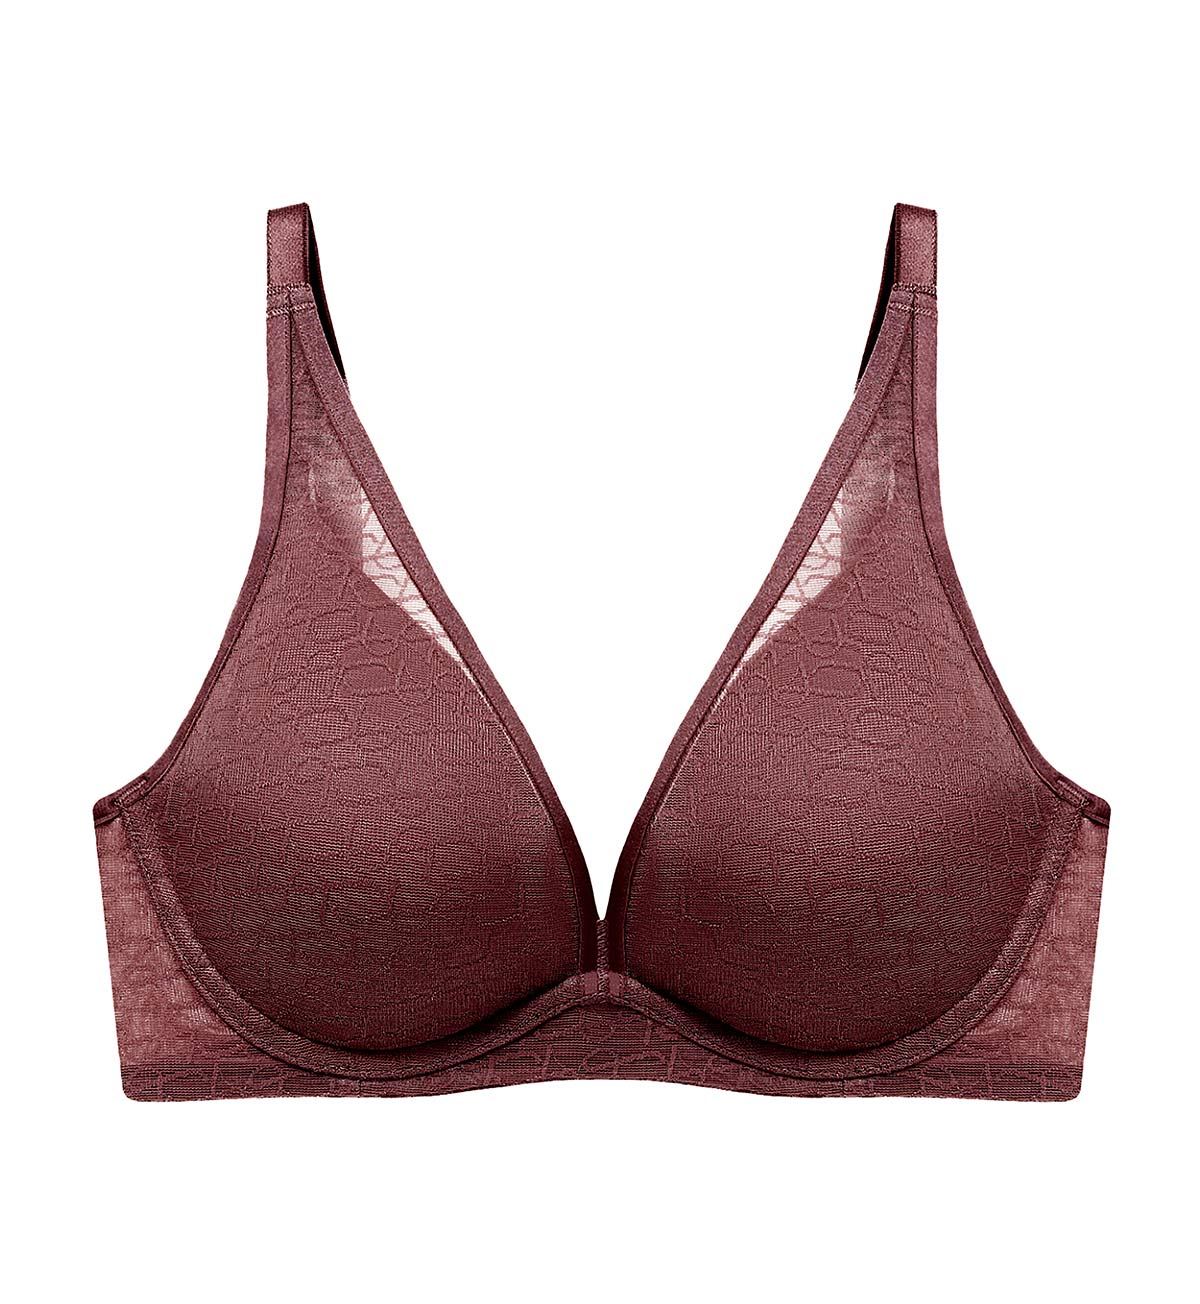 Signature Sheer Non Wired Push Up Deep V Bra in Decadent Chocolate